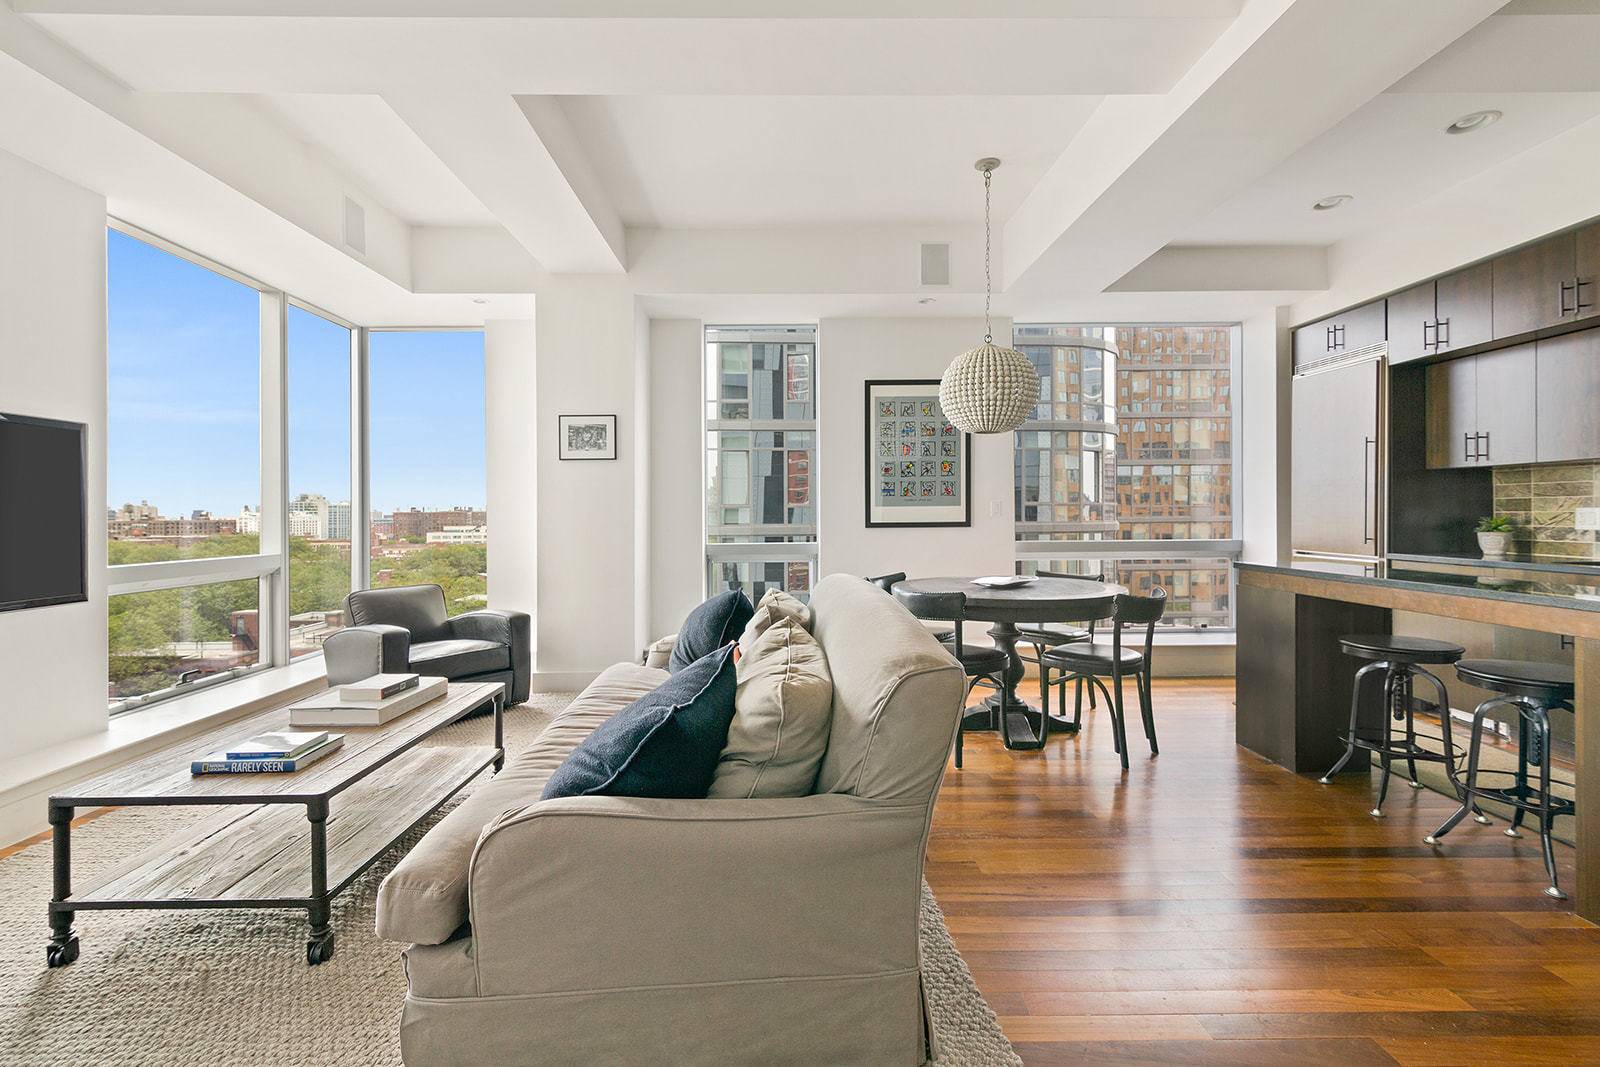 Bespoke and beautiful, residence 1001 at the Toren Condominium is a sprawling split two bedroom two bath with breathtaking Manhattan views from a wall of nearly uninterrupted floor to ceiling ...